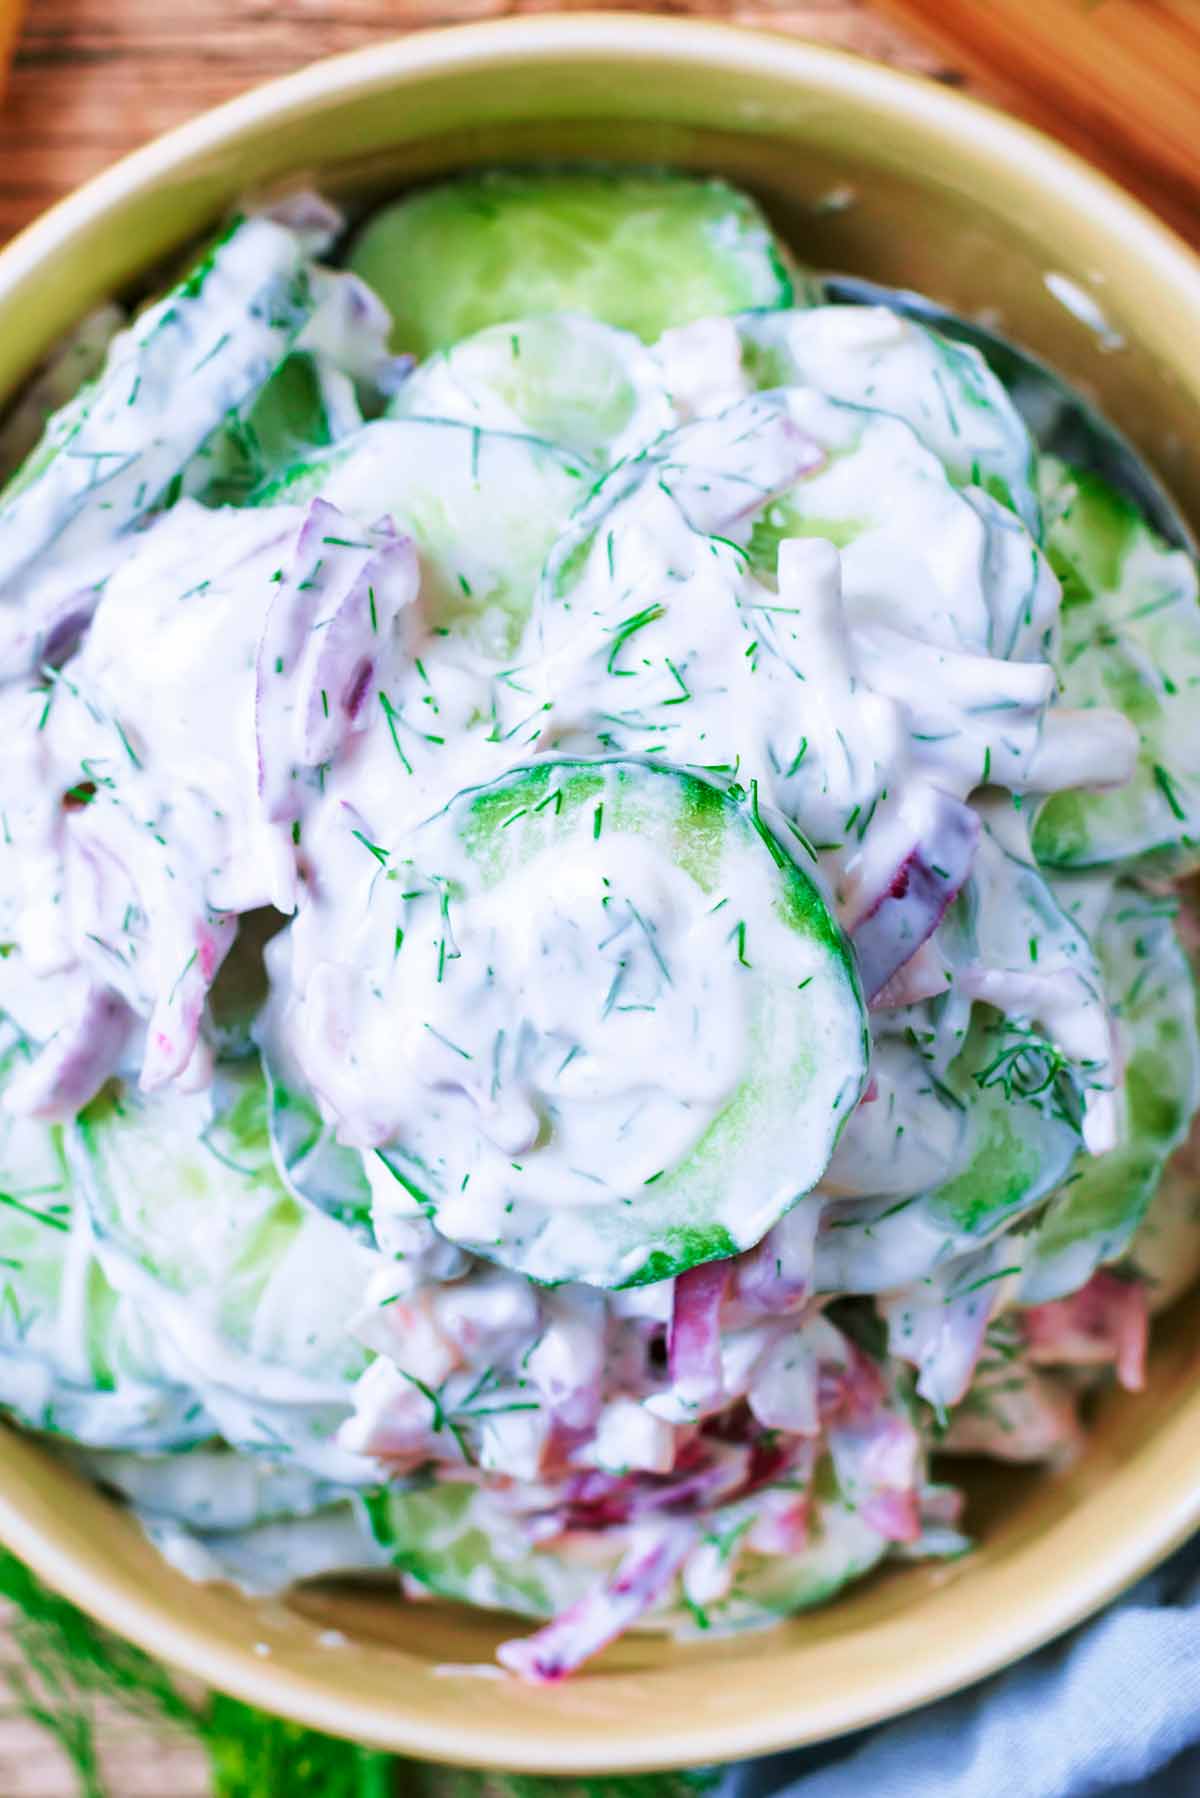 Slices of cucumber dressed in a creamy sauce with chopped onions and dill.